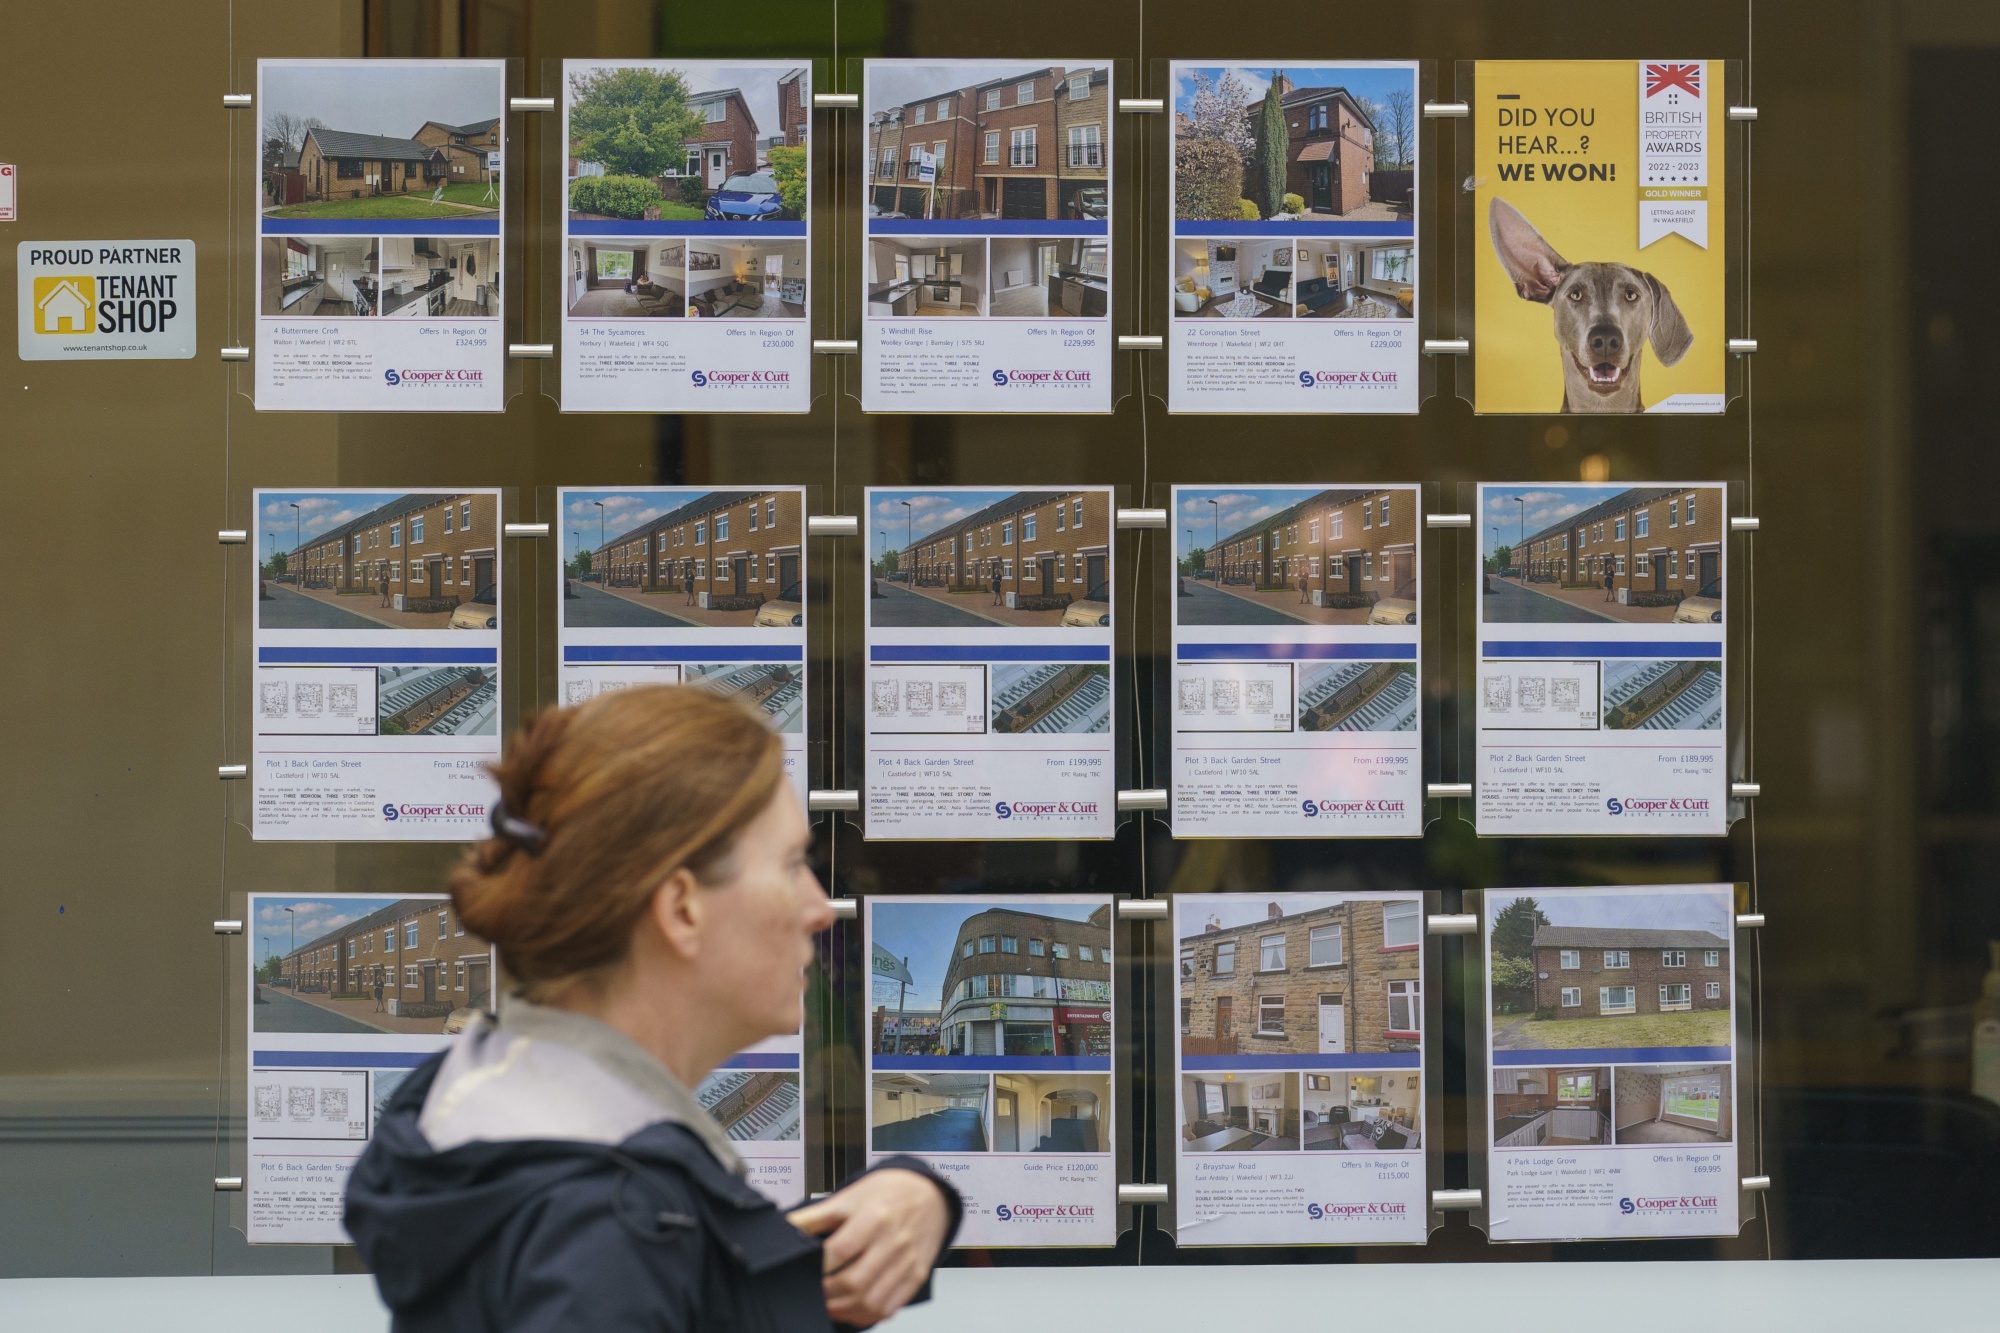 UK home prices declined for the first time in half a year.